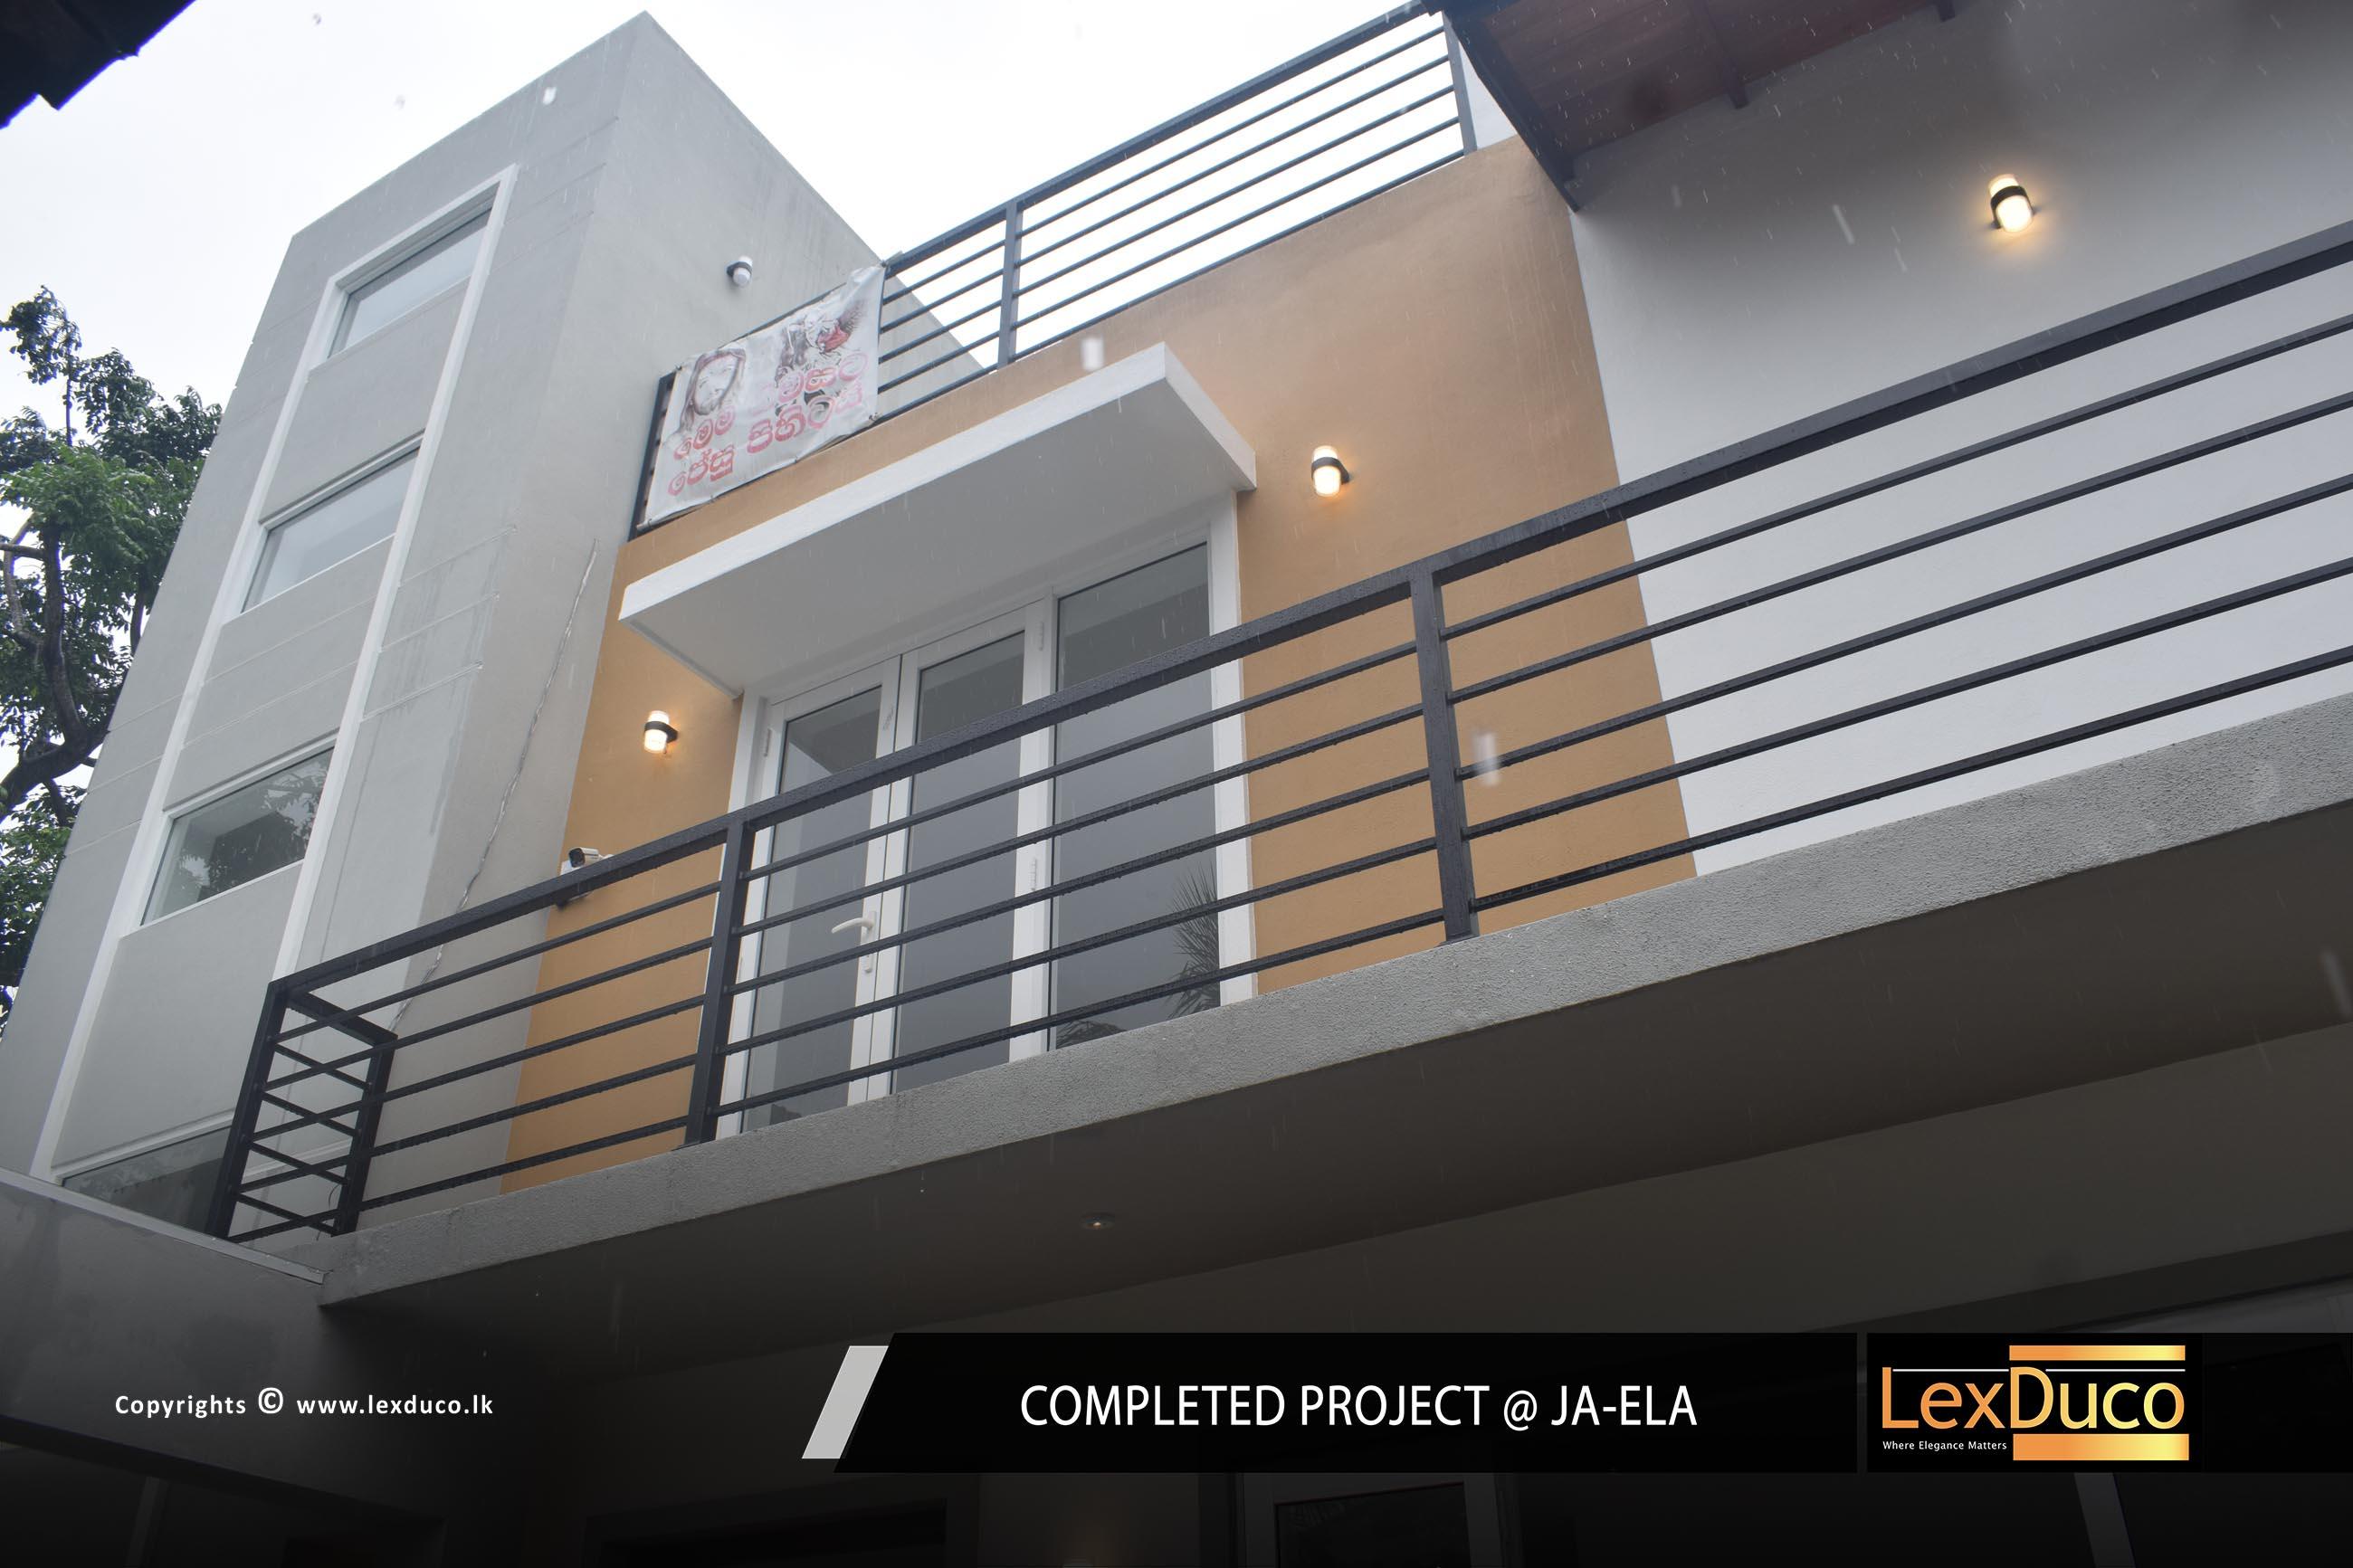 Completed Project at Ja ela | Lex Duco